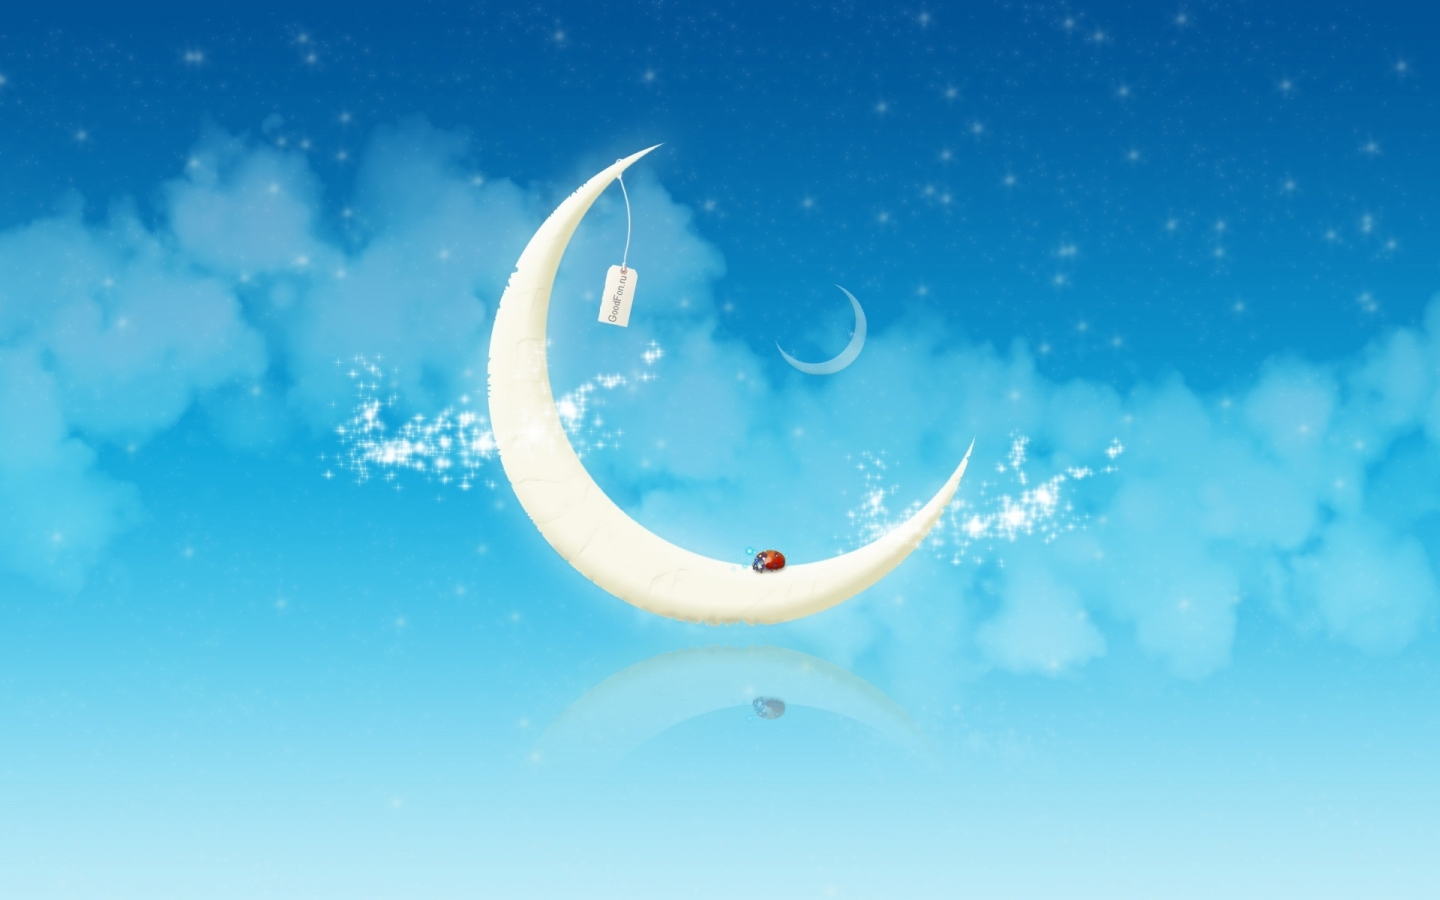 Abstract moon 3d for 1440 x 900 widescreen resolution